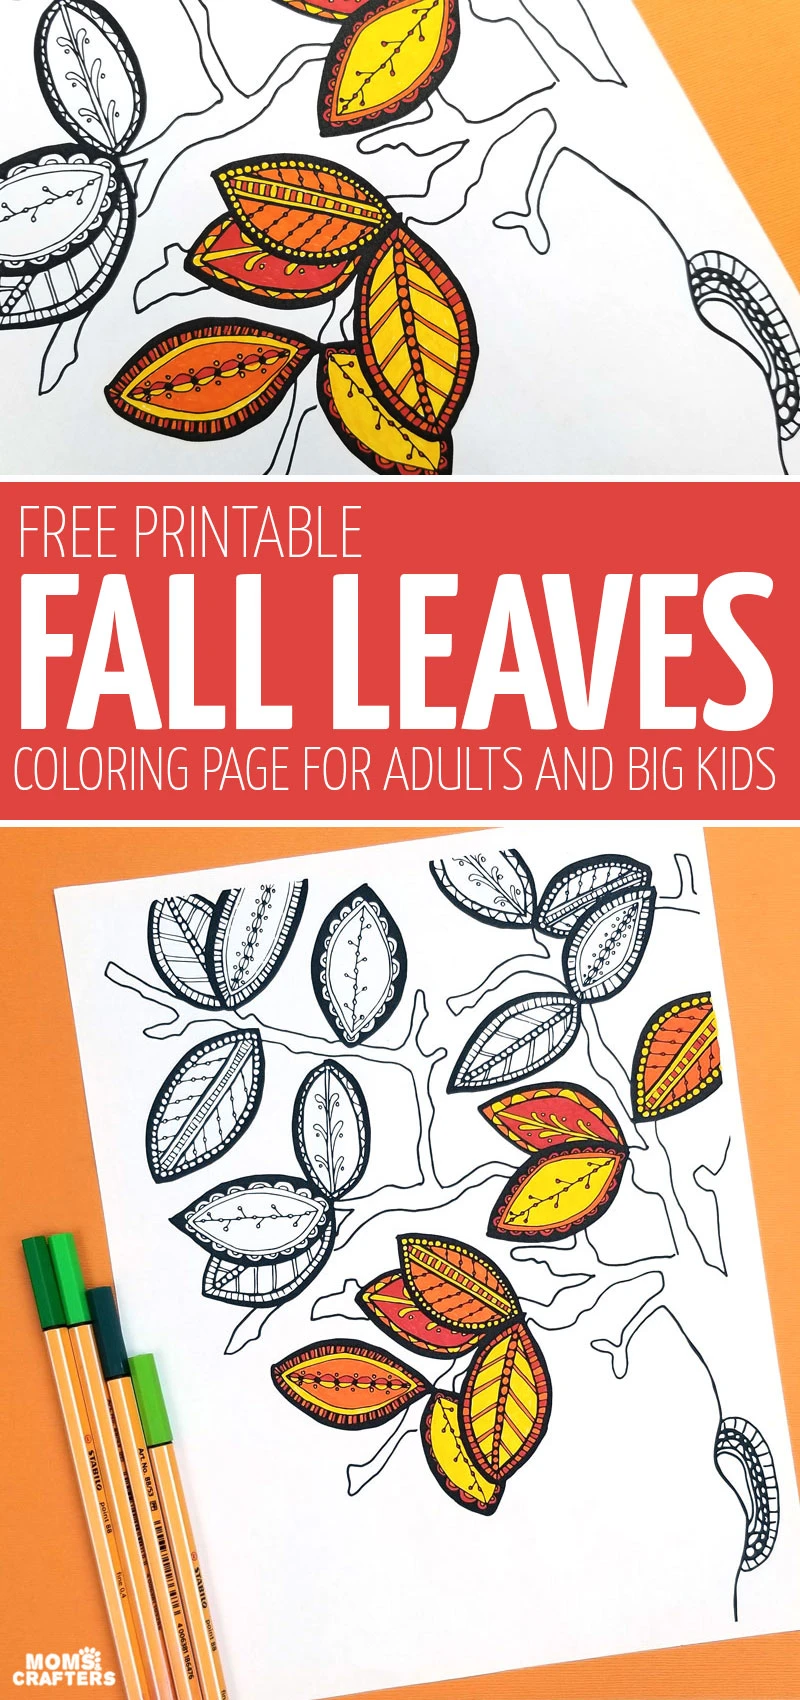 Click for free printable atumn coloring pages for adults! This free fall adult coloring page is not too complex and great for unwinding and relaxing with!